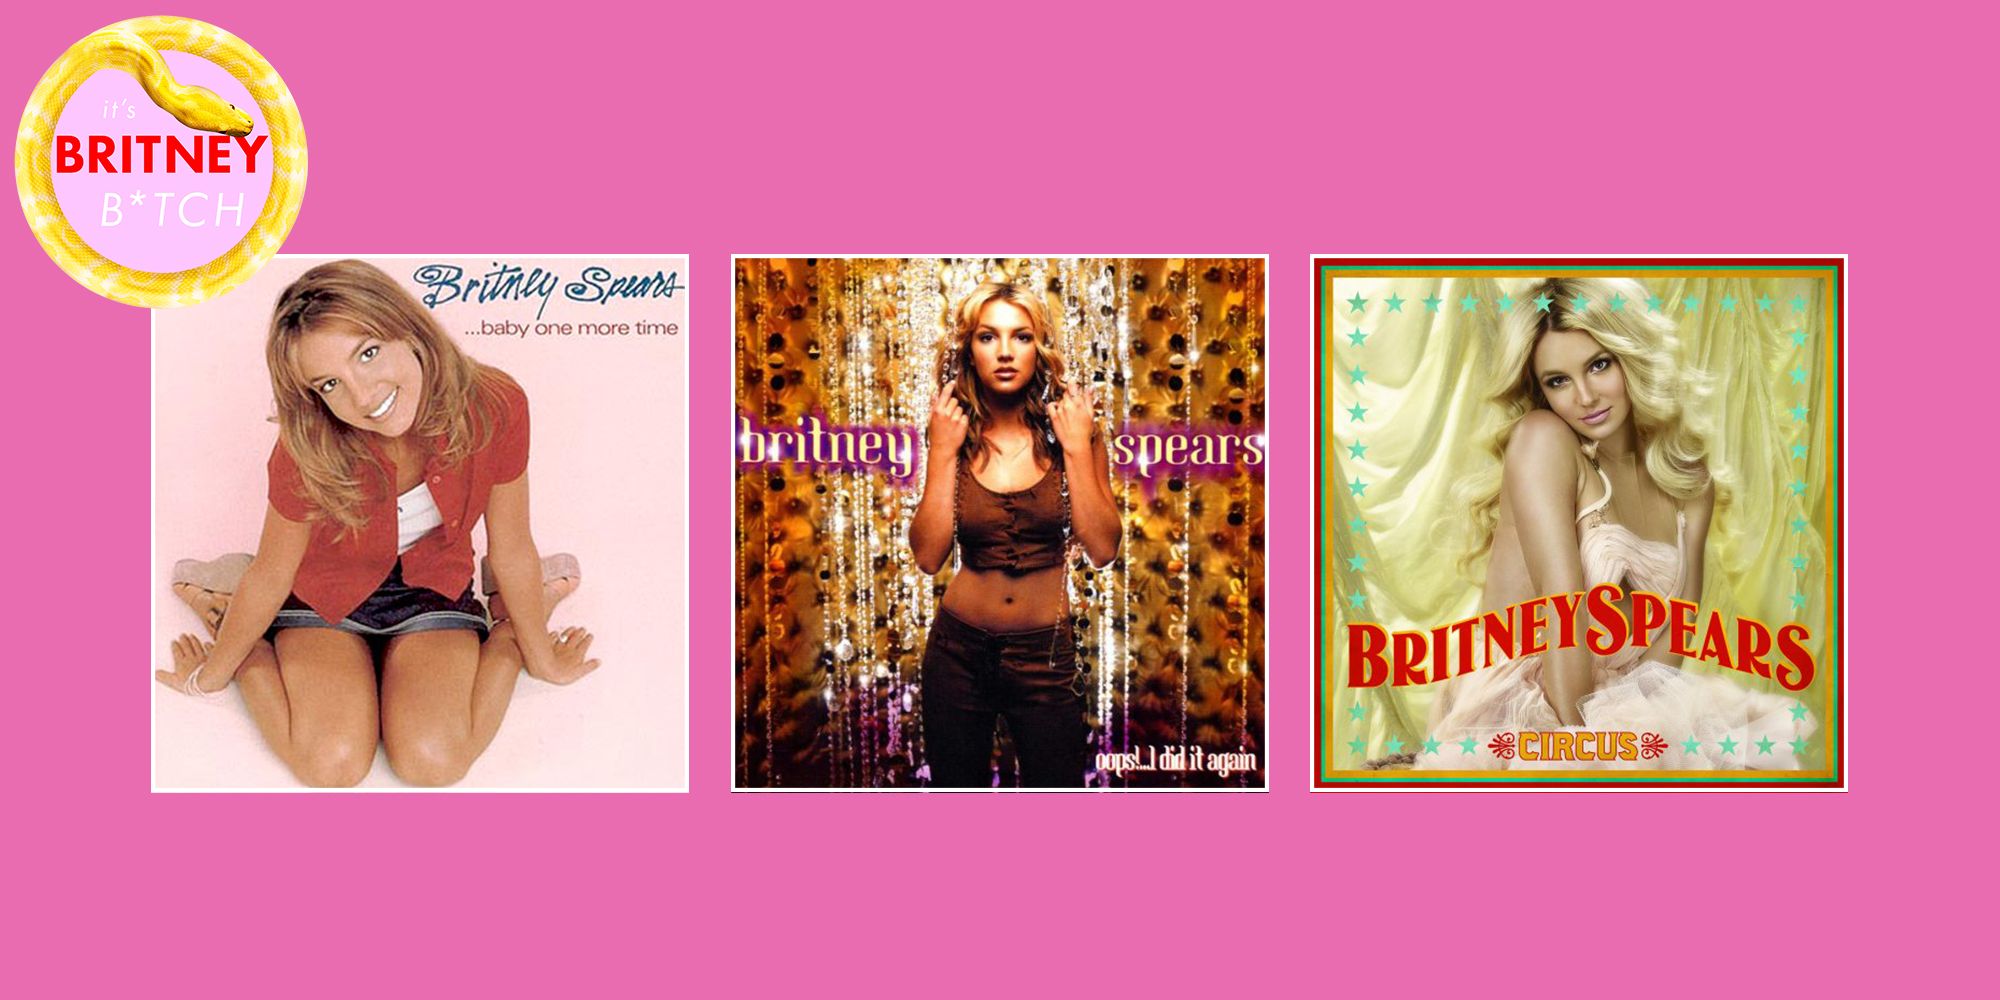 Britney Spears Top 30 Songs Playlist A Definitive Ranking